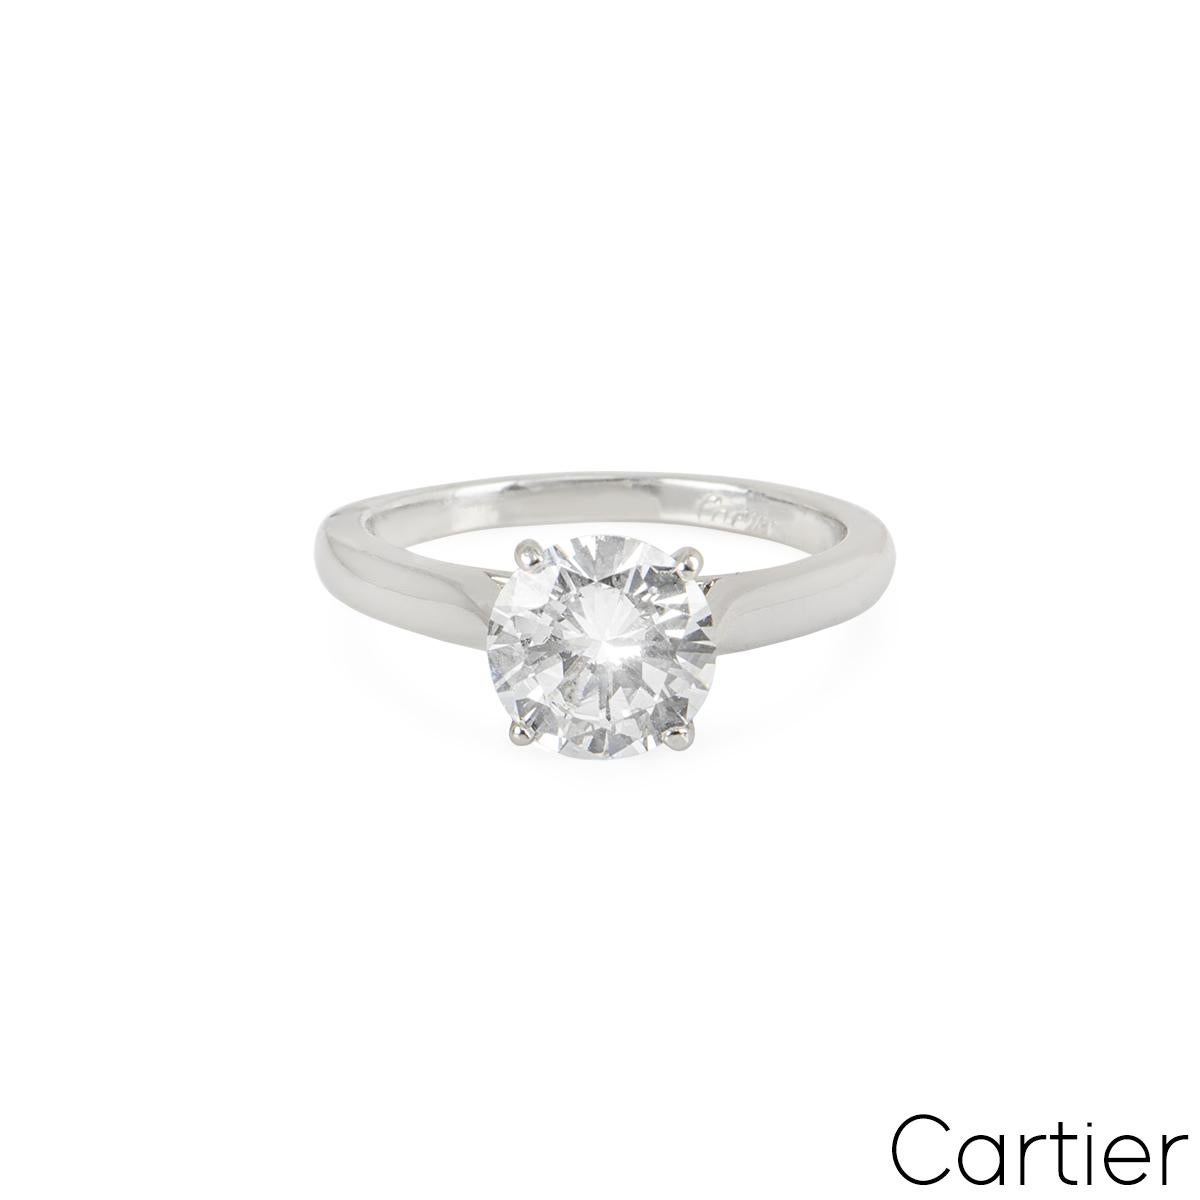 Cartier Platinum Diamond Engagement Ring 1.51ct D/VVS2 GIA Certified In Excellent Condition For Sale In London, GB